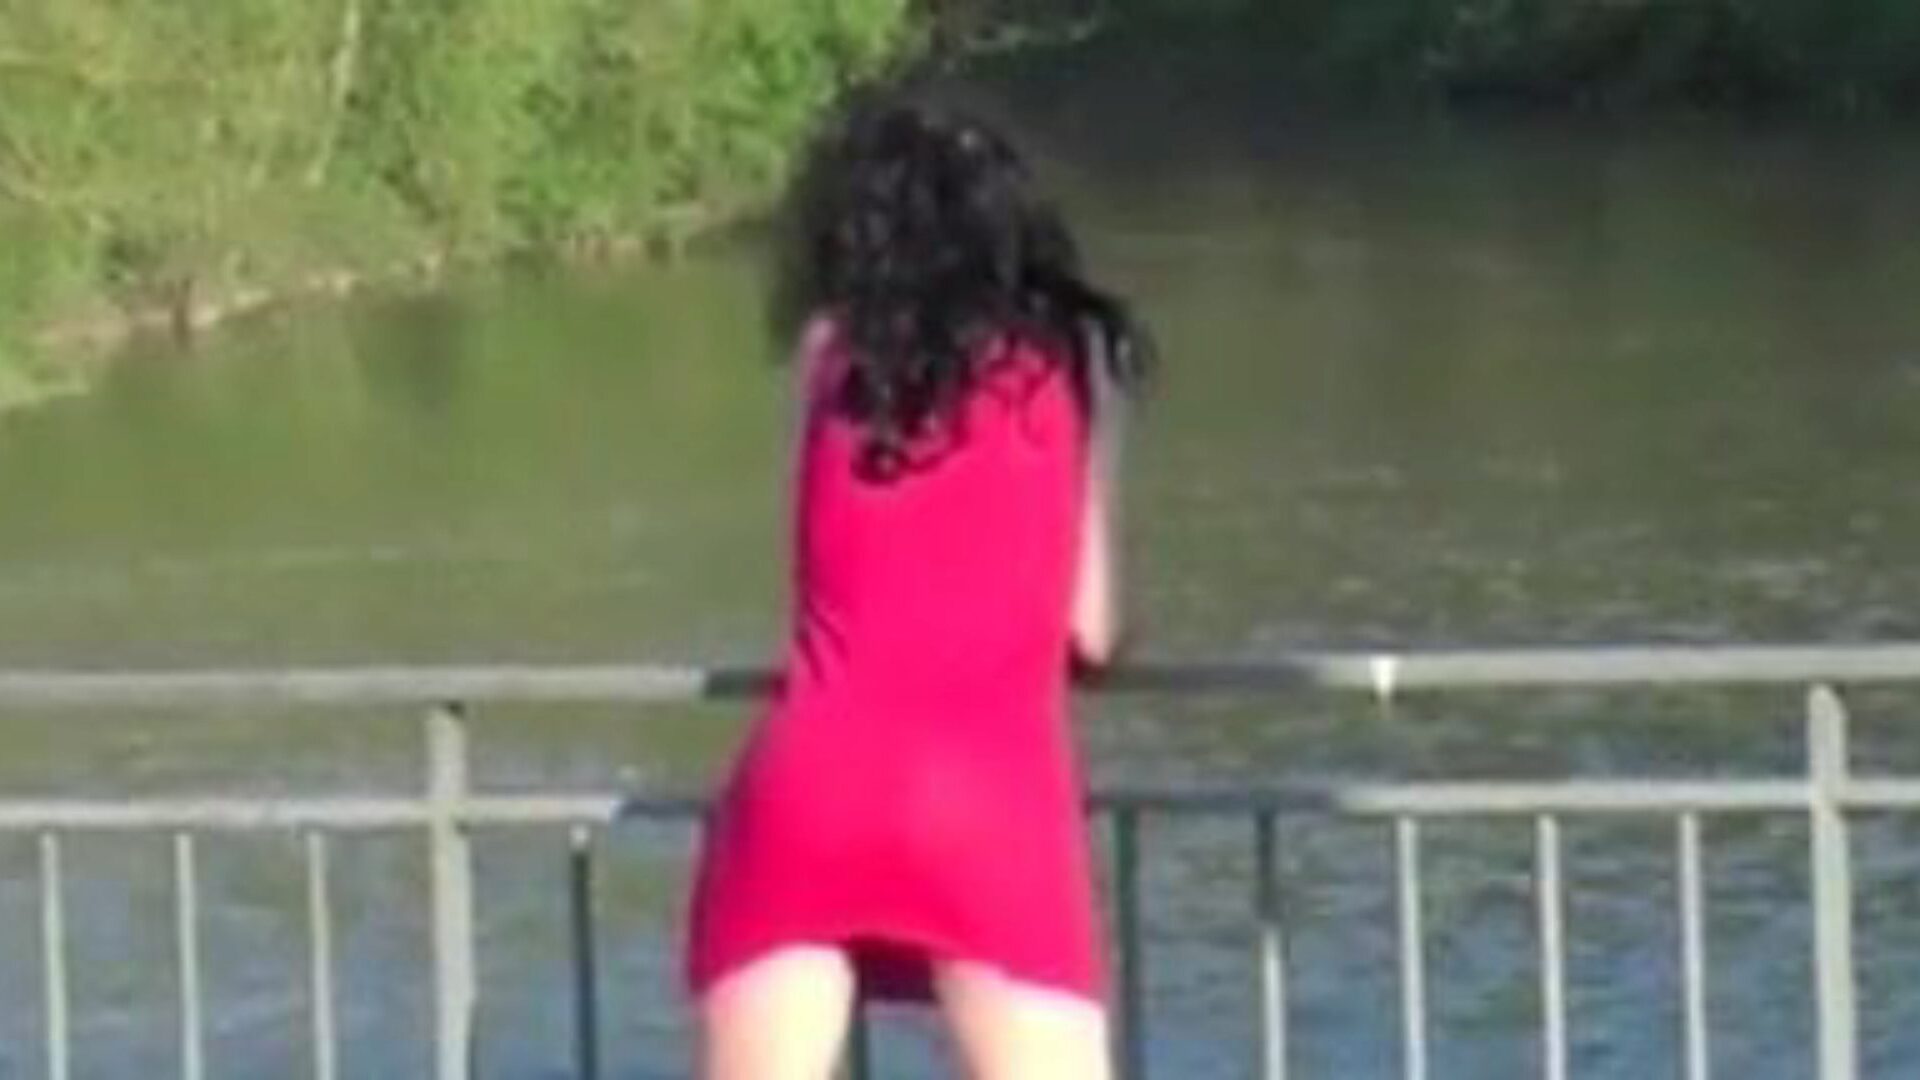 Monica Baisee Au Parc Public, Free Public Tube Porn Video 49 Watch Monica Baisee Au Parc Public episode on xHamster, the most excellent hump tube website with tons of free-for-all Public Tube Public Xnxx & Pussy porn movies